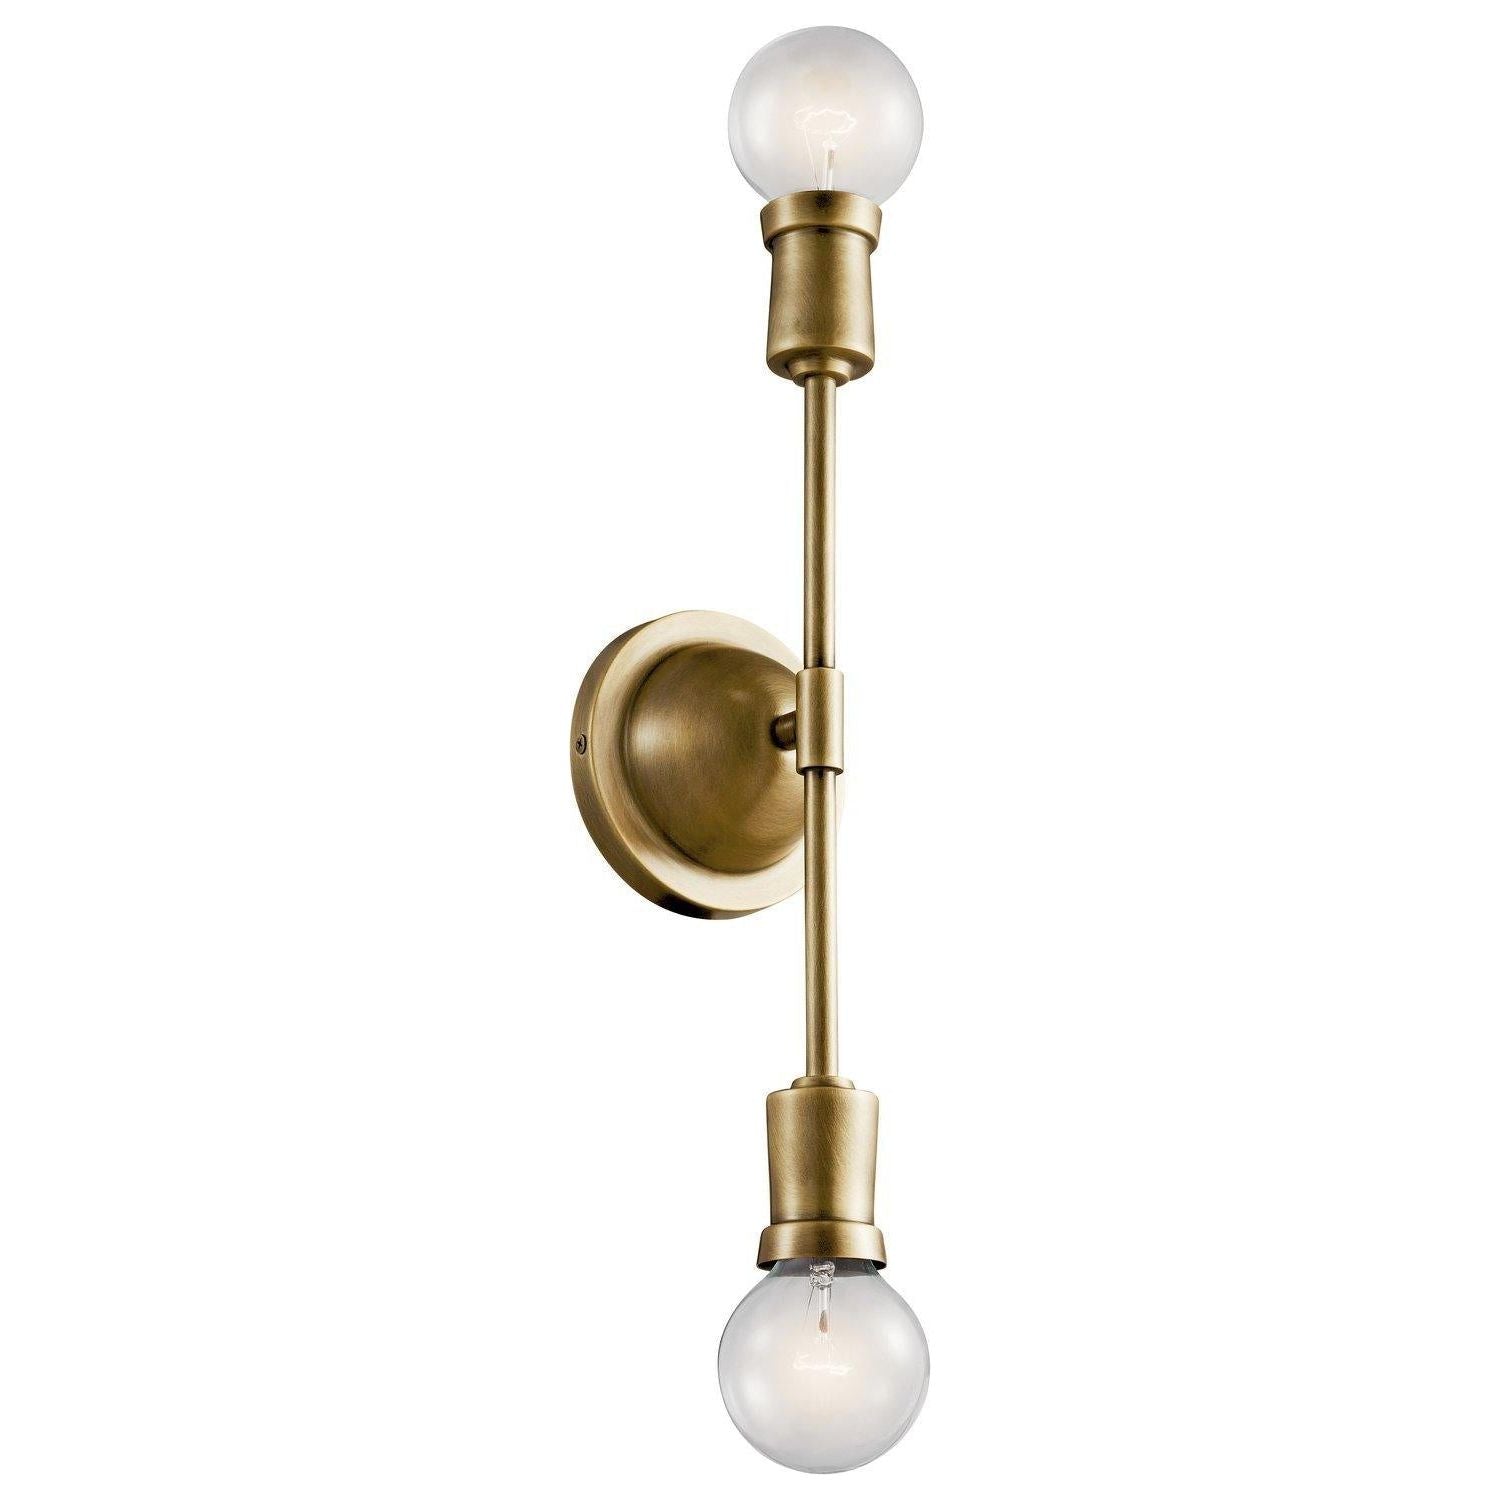 Kichler - Armstrong Sconce - Lights Canada